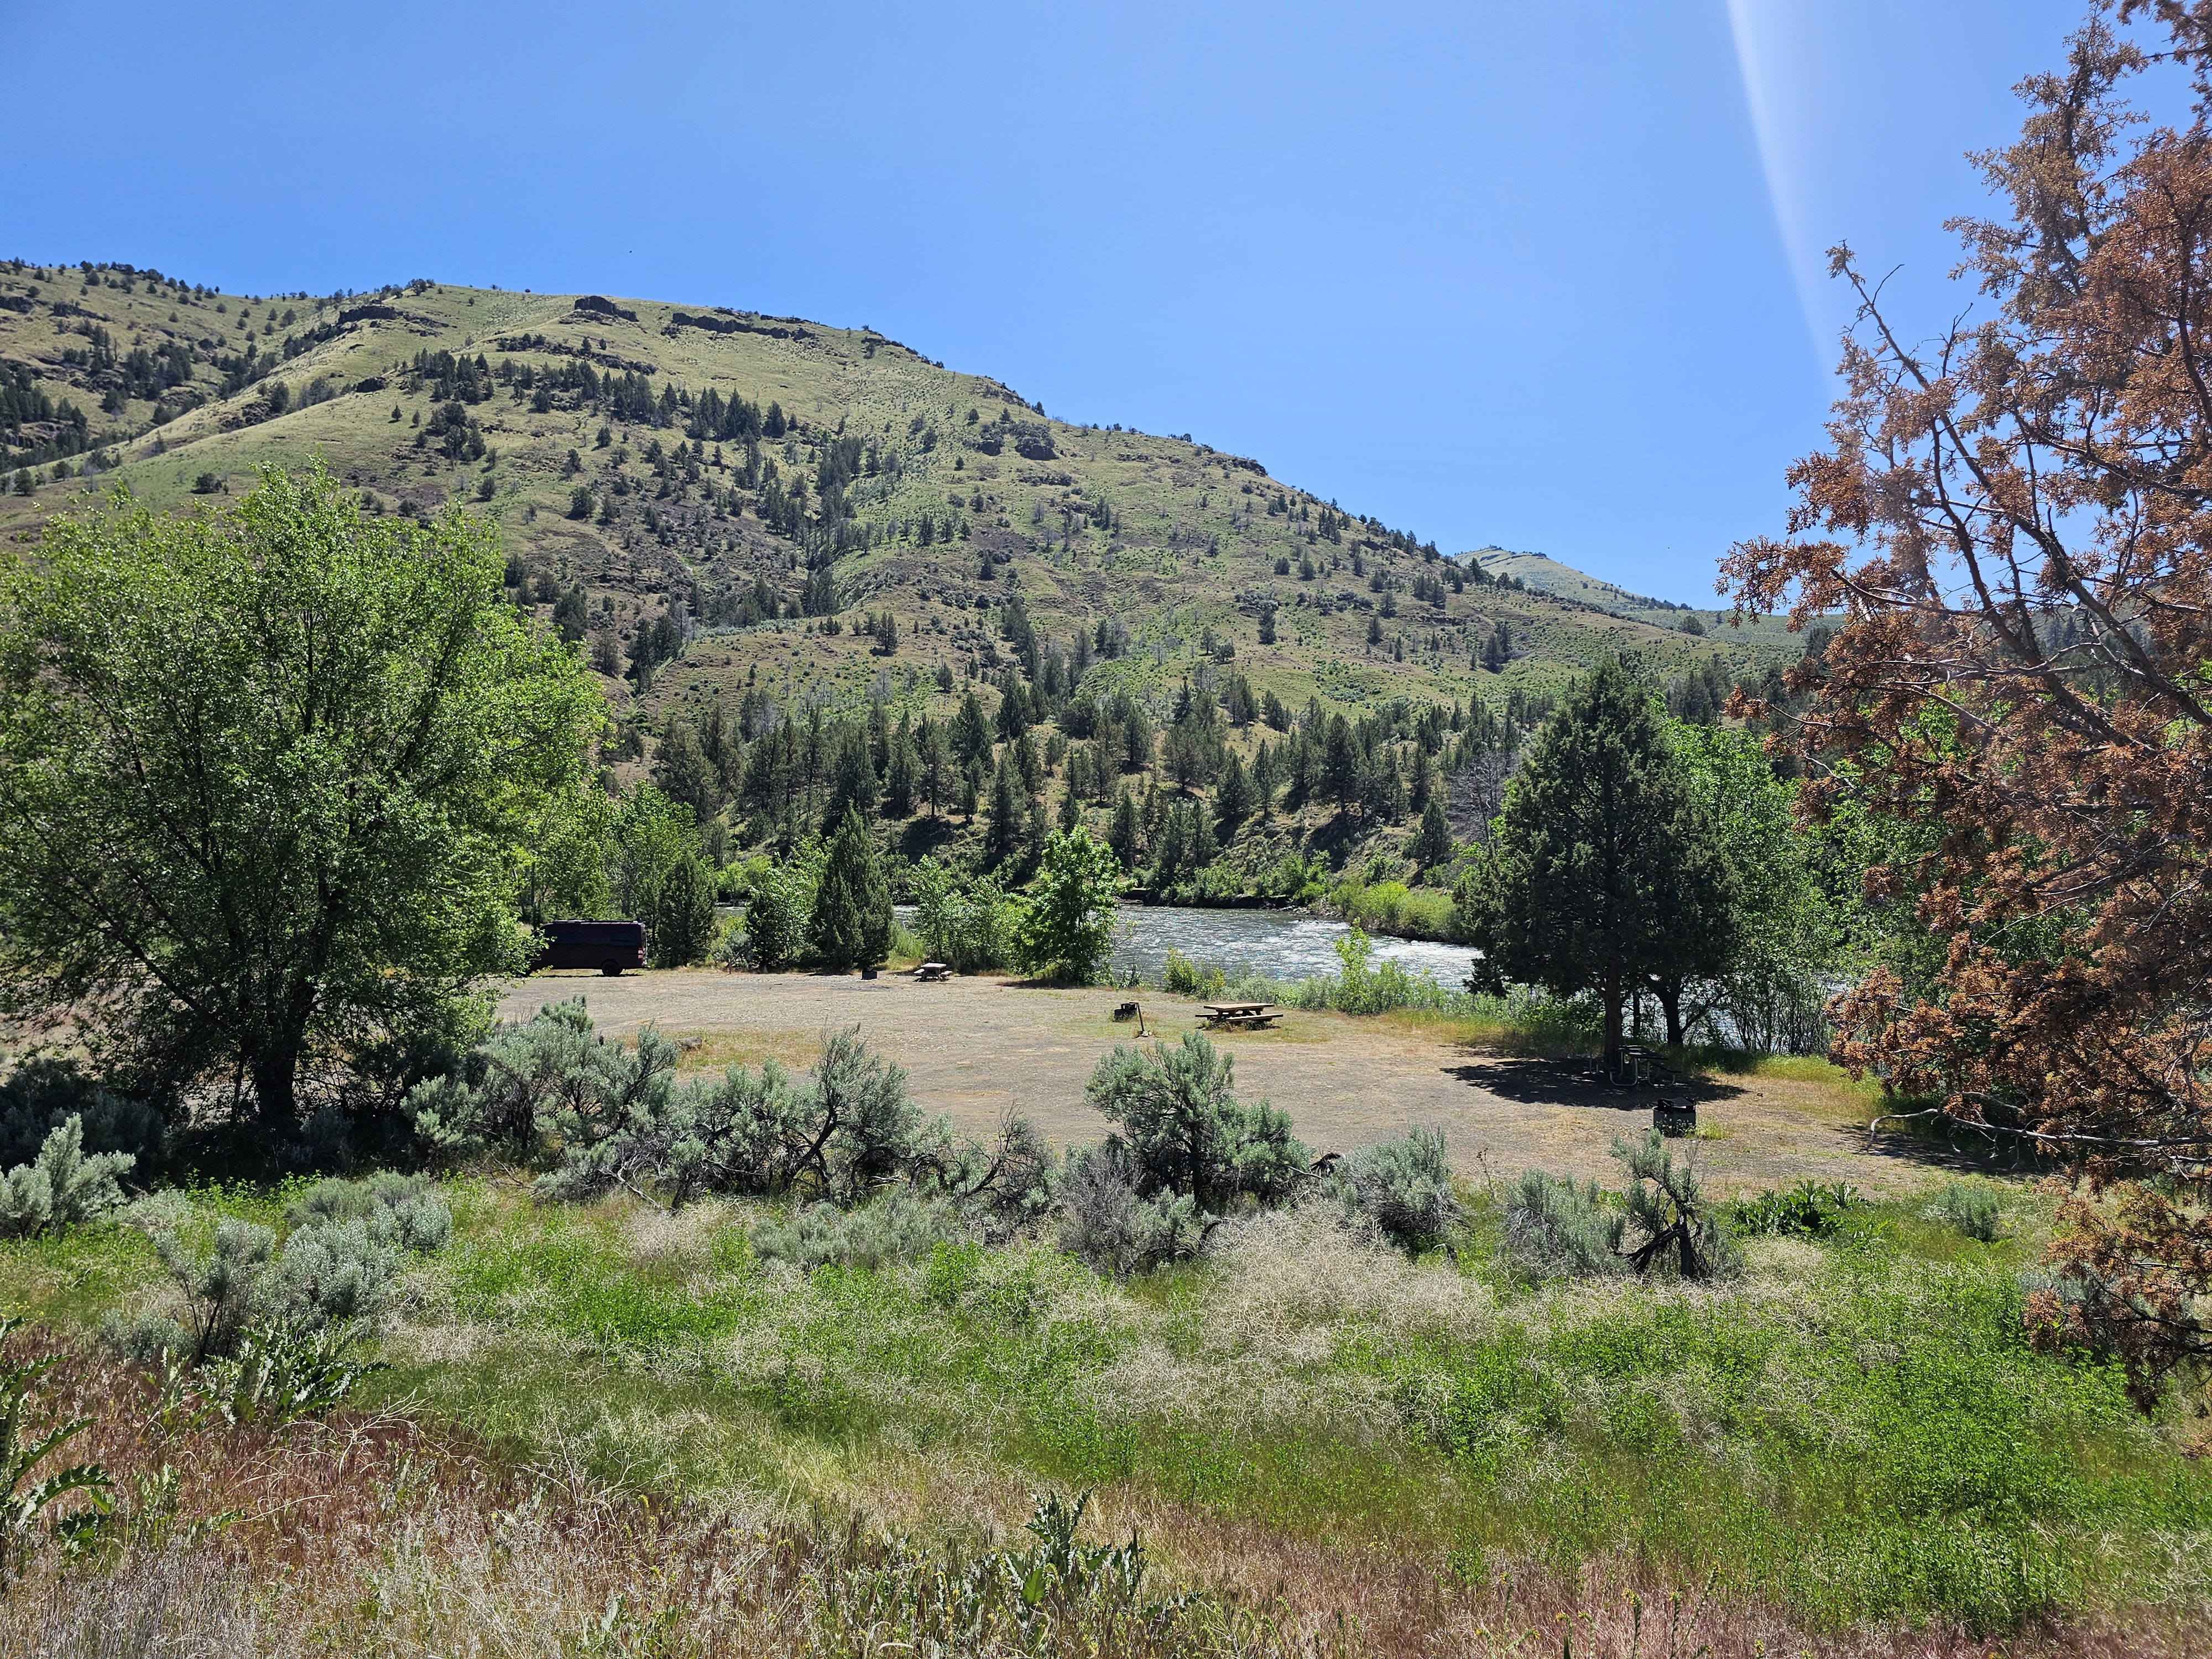 View of Lone Pine Campground